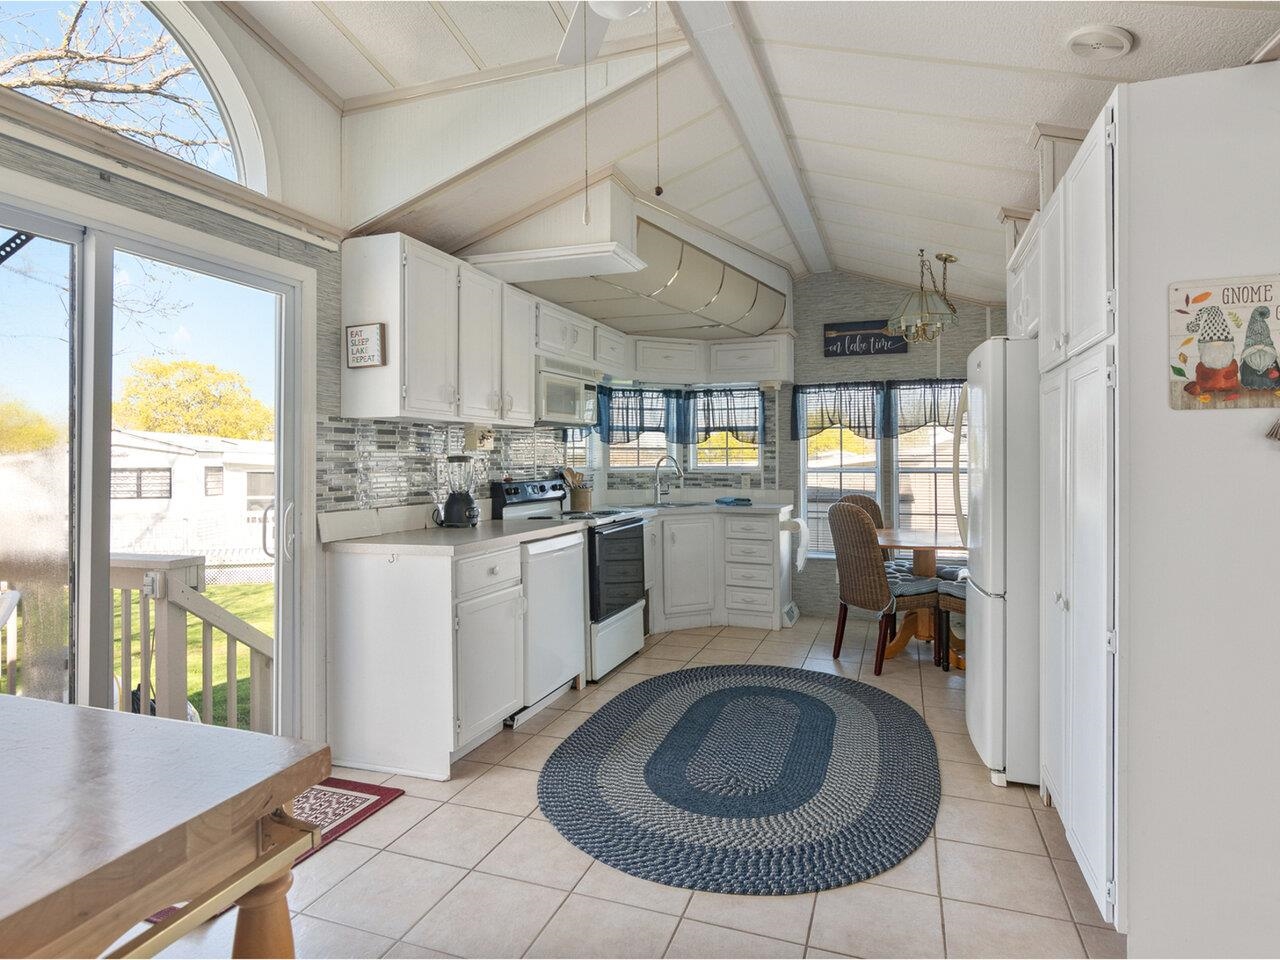 Kitchen connects to the deck